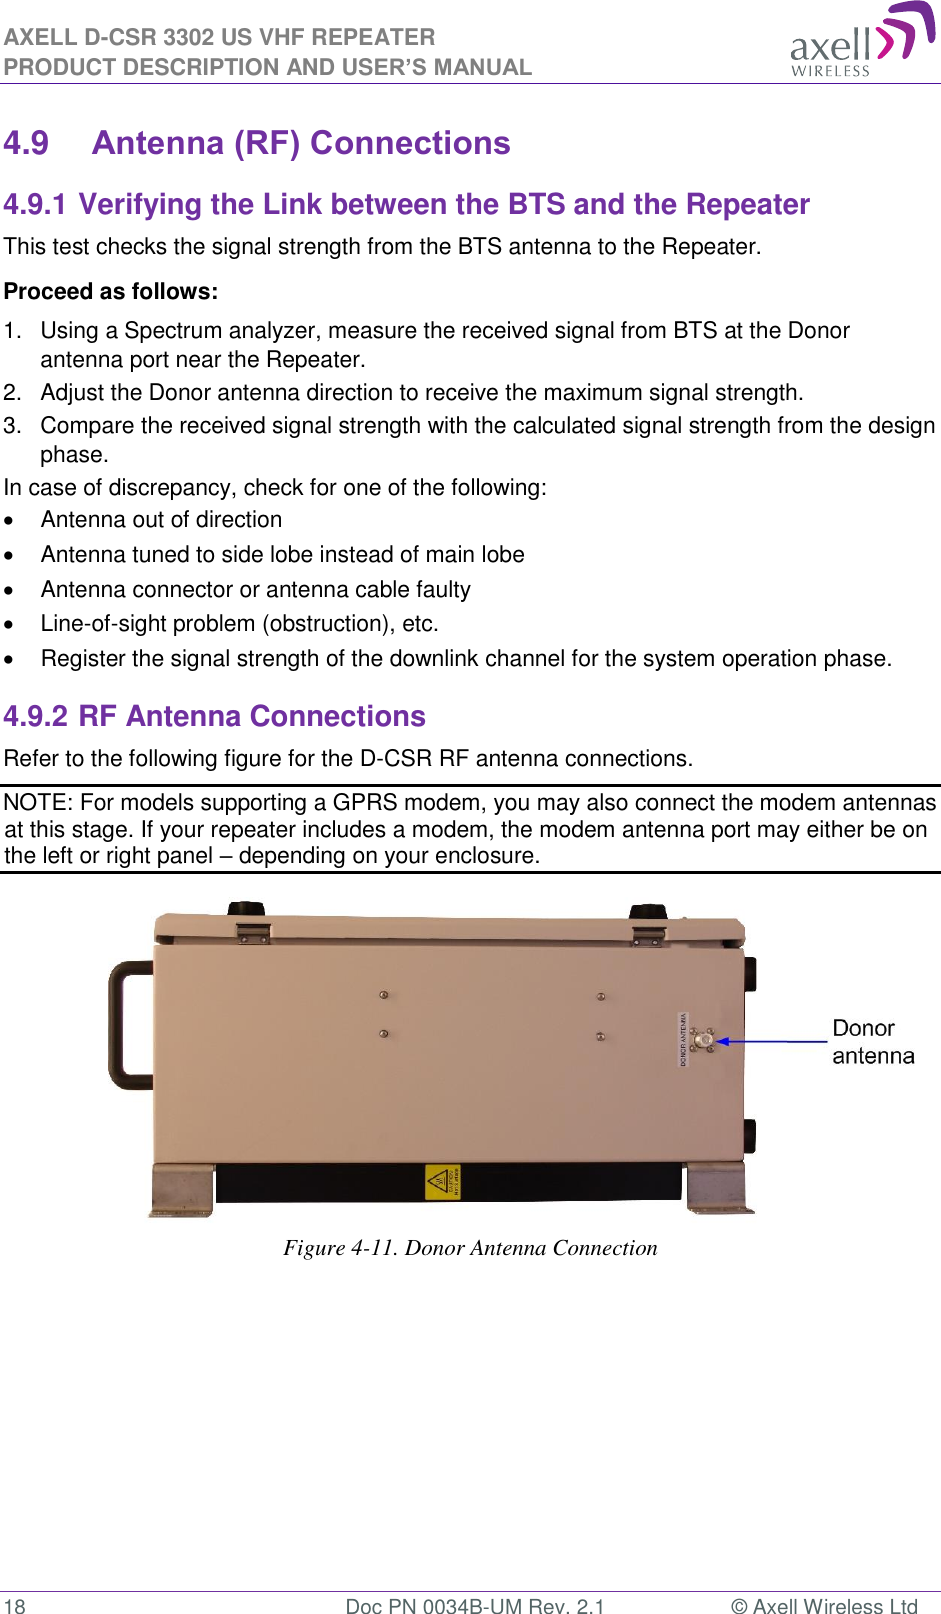 AXELL D-CSR 3302 US VHF REPEATER PRODUCT DESCRIPTION AND USER’S MANUAL  18  Doc PN 0034B-UM Rev. 2.1  © Axell Wireless Ltd 4.9 Antenna (RF) Connections 4.9.1 Verifying the Link between the BTS and the Repeater This test checks the signal strength from the BTS antenna to the Repeater.  Proceed as follows:  1.  Using a Spectrum analyzer, measure the received signal from BTS at the Donor antenna port near the Repeater.  2.  Adjust the Donor antenna direction to receive the maximum signal strength. 3.  Compare the received signal strength with the calculated signal strength from the design phase.  In case of discrepancy, check for one of the following:    Antenna out of direction    Antenna tuned to side lobe instead of main lobe    Antenna connector or antenna cable faulty    Line-of-sight problem (obstruction), etc.   Register the signal strength of the downlink channel for the system operation phase. 4.9.2 RF Antenna Connections Refer to the following figure for the D-CSR RF antenna connections.  NOTE: For models supporting a GPRS modem, you may also connect the modem antennas at this stage. If your repeater includes a modem, the modem antenna port may either be on the left or right panel – depending on your enclosure.              Figure 4-11. Donor Antenna Connection        